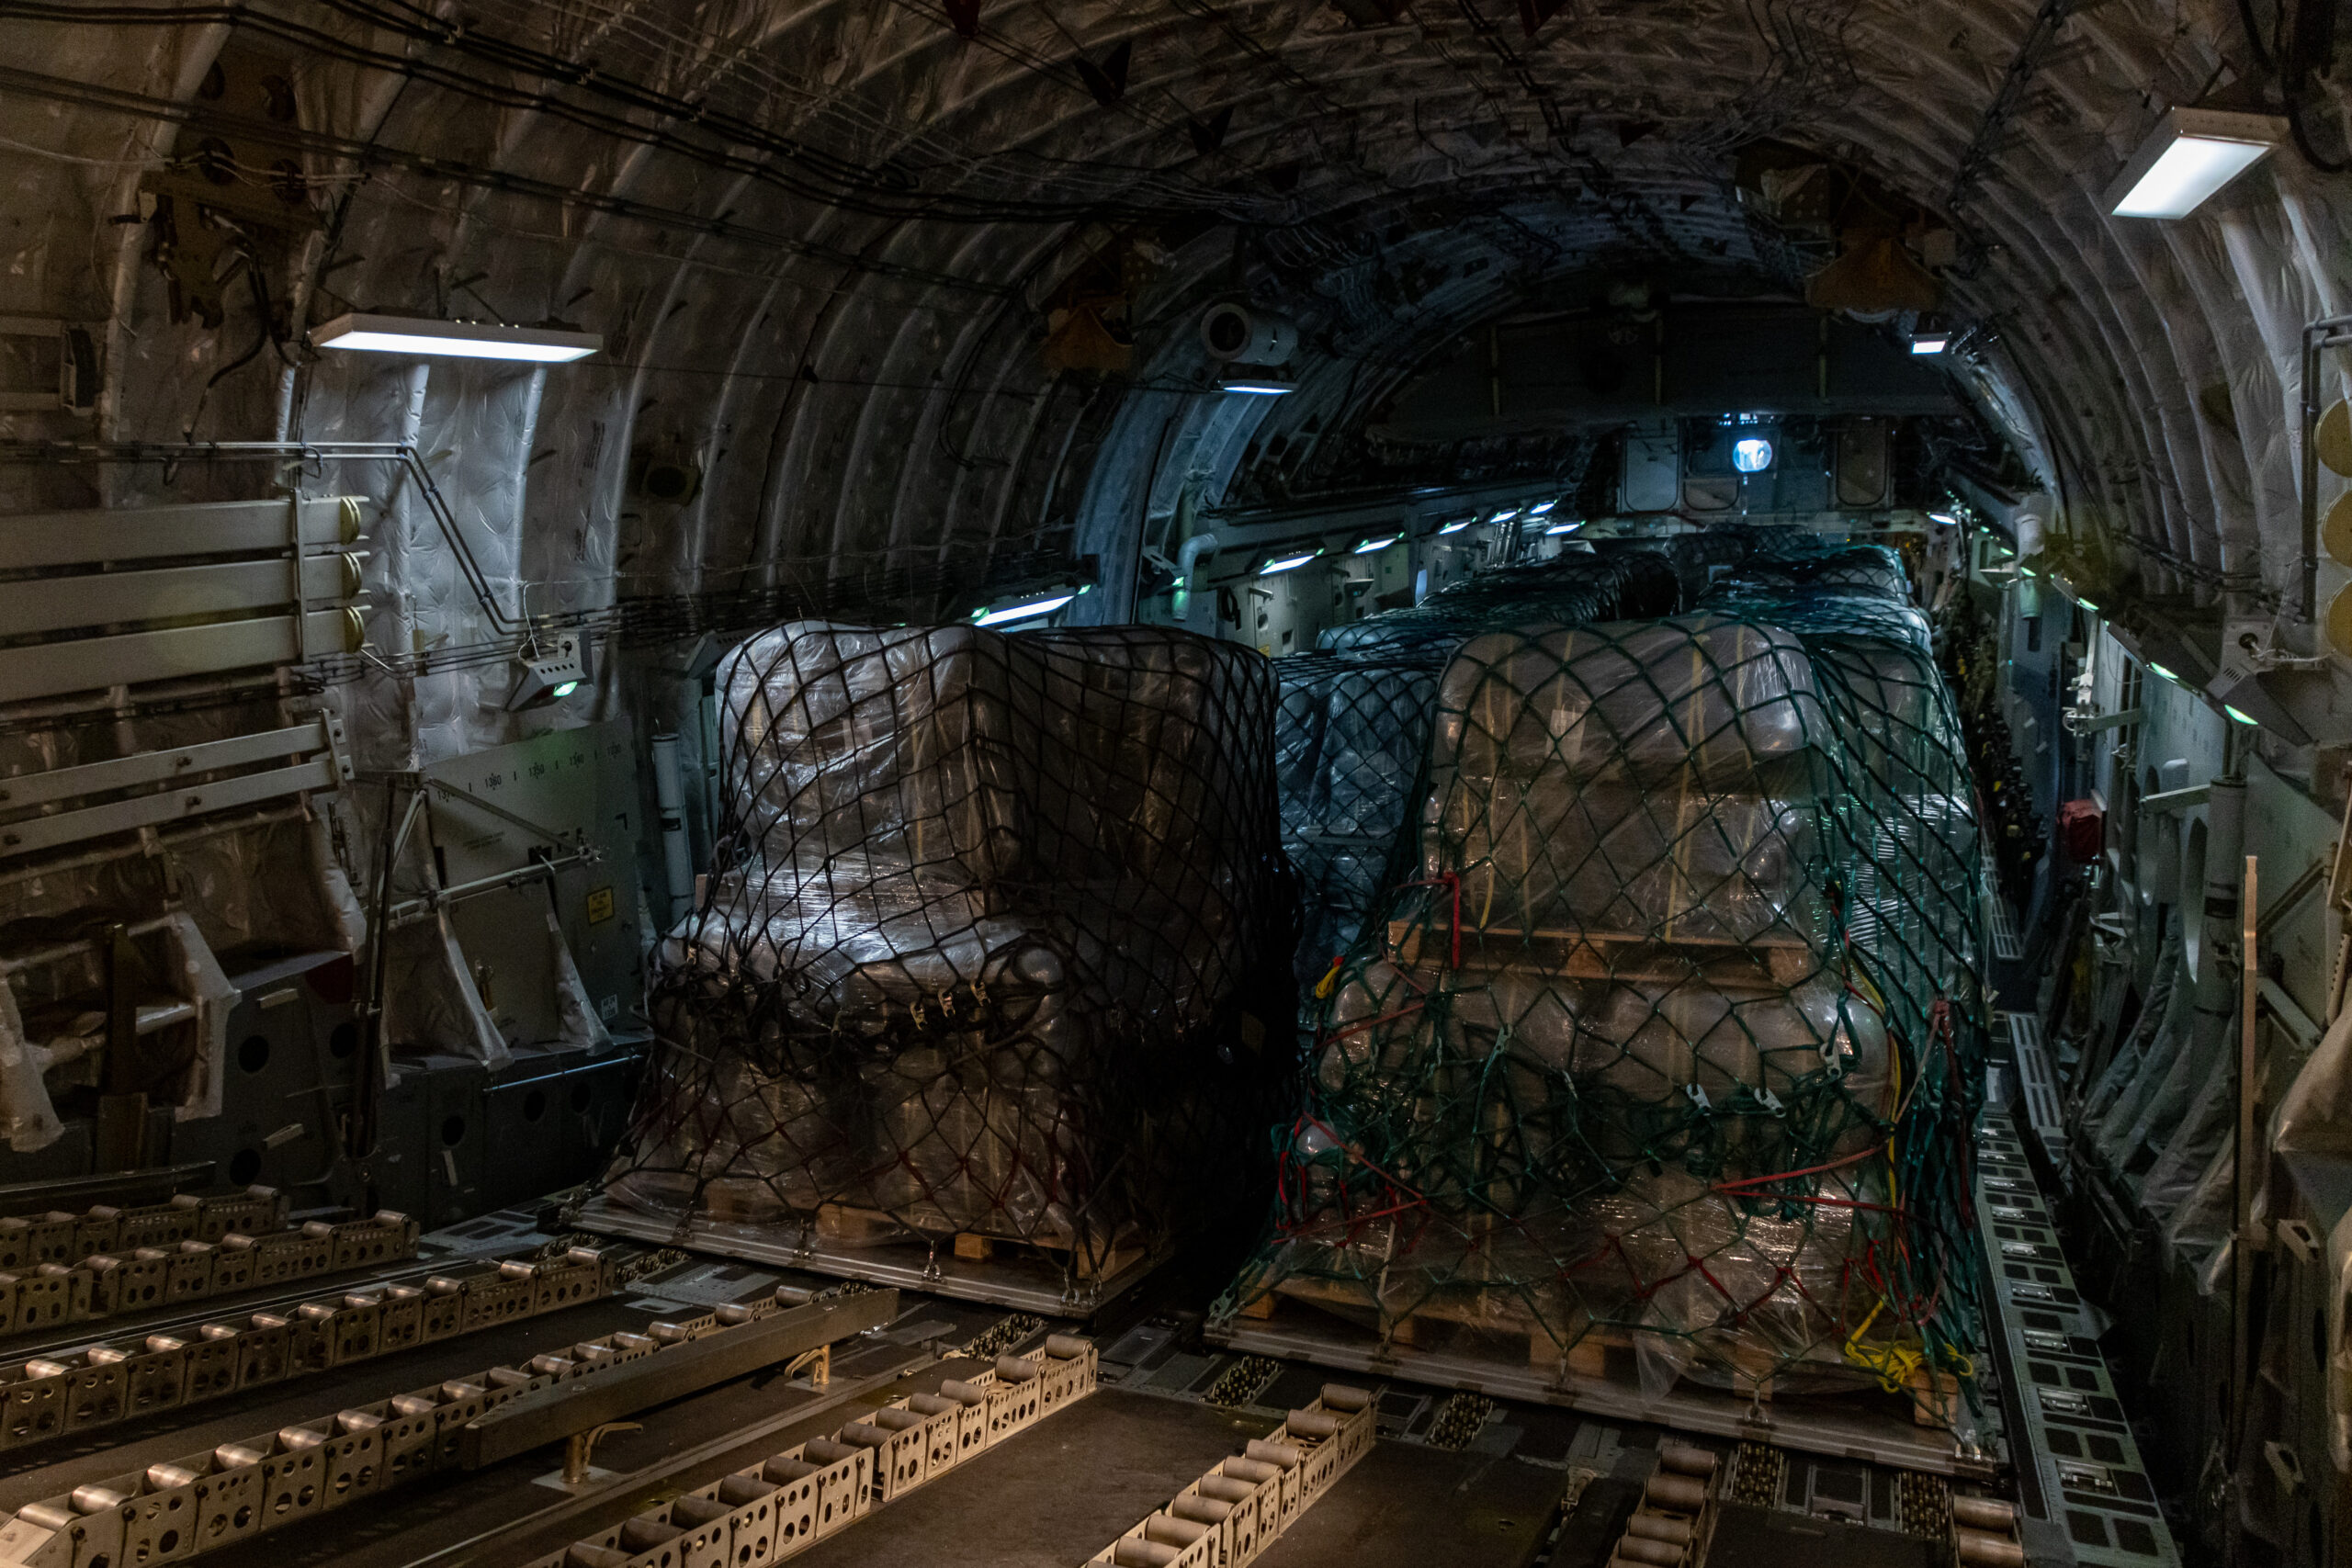 A Royal Air Force C-17 Globemaster arrived in Egypt on the 23rd of November 2023 to deliver UK Aid.The fourth UK aircraft carrying humanitarian aid landed in Al Arish, Egypt, for onward transfer to Gaza. The RAF flight carried 23 tonnes of humanitarian aid, including 4,500 blankets and 4,500 sleeping mats for distribution by the United Nations Relief and Works Agency (UNRWA). Defence Secretary Grant Shapps said: The RAF continues to deliver on the UK’s commitment to helping those in need by operating flights into the region to provide urgent humanitarian support which will save civilian lives. The UK is driving international efforts to support the humanitarian response in Gaza, working closely alongside partners and allies to de-escalate the situation.